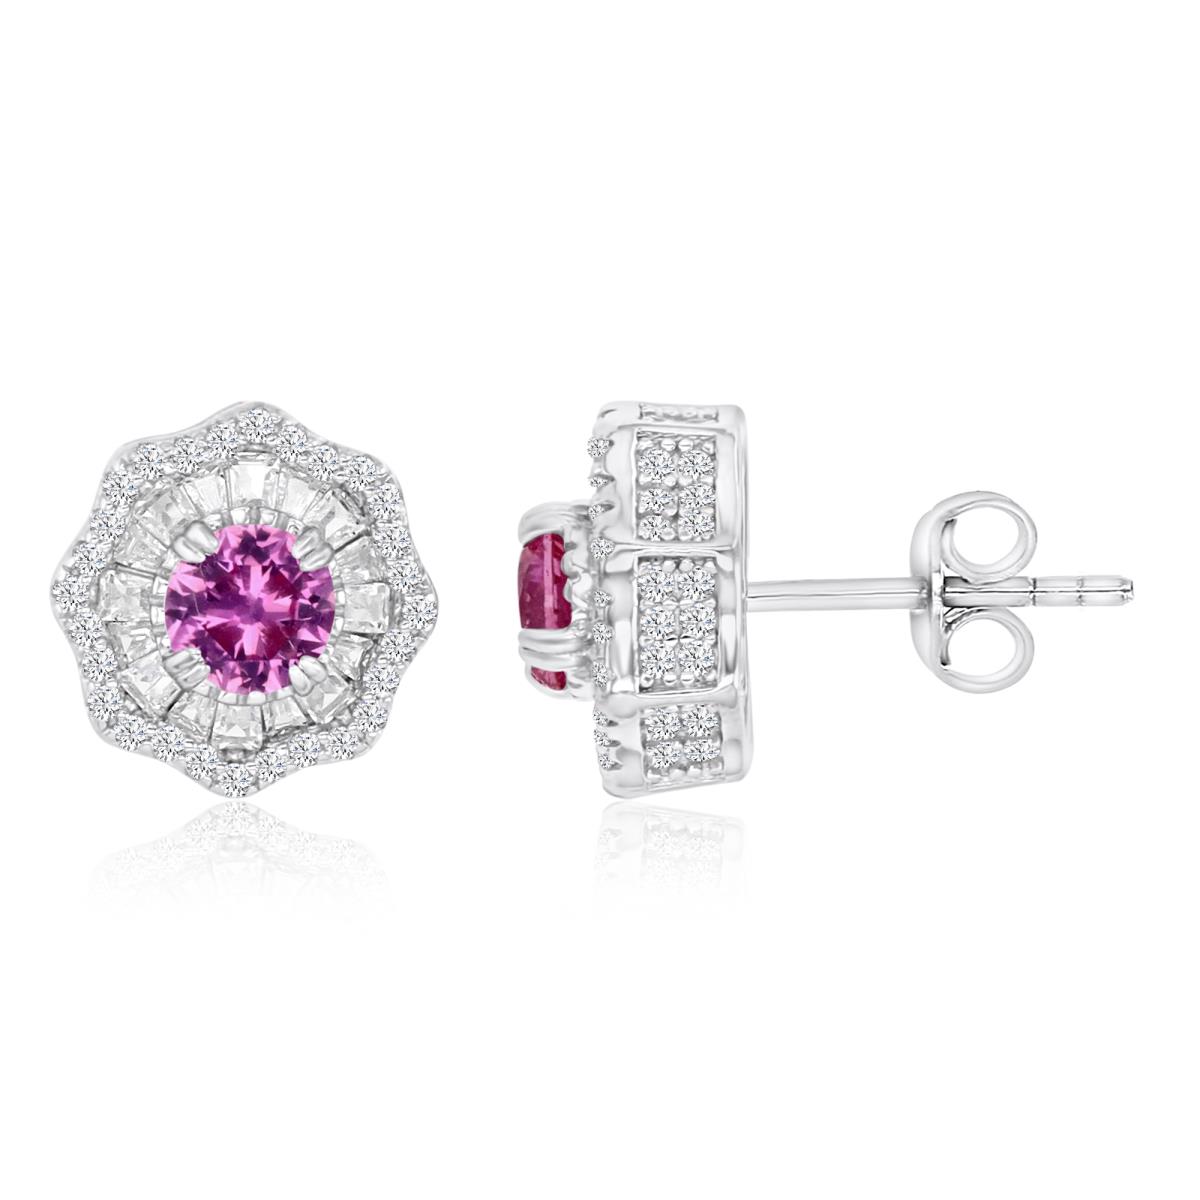 Sterling Silver Rhodium 11MM Polished Cr Pink & Cr White Sapphire Octagon Flower Stud Earrings